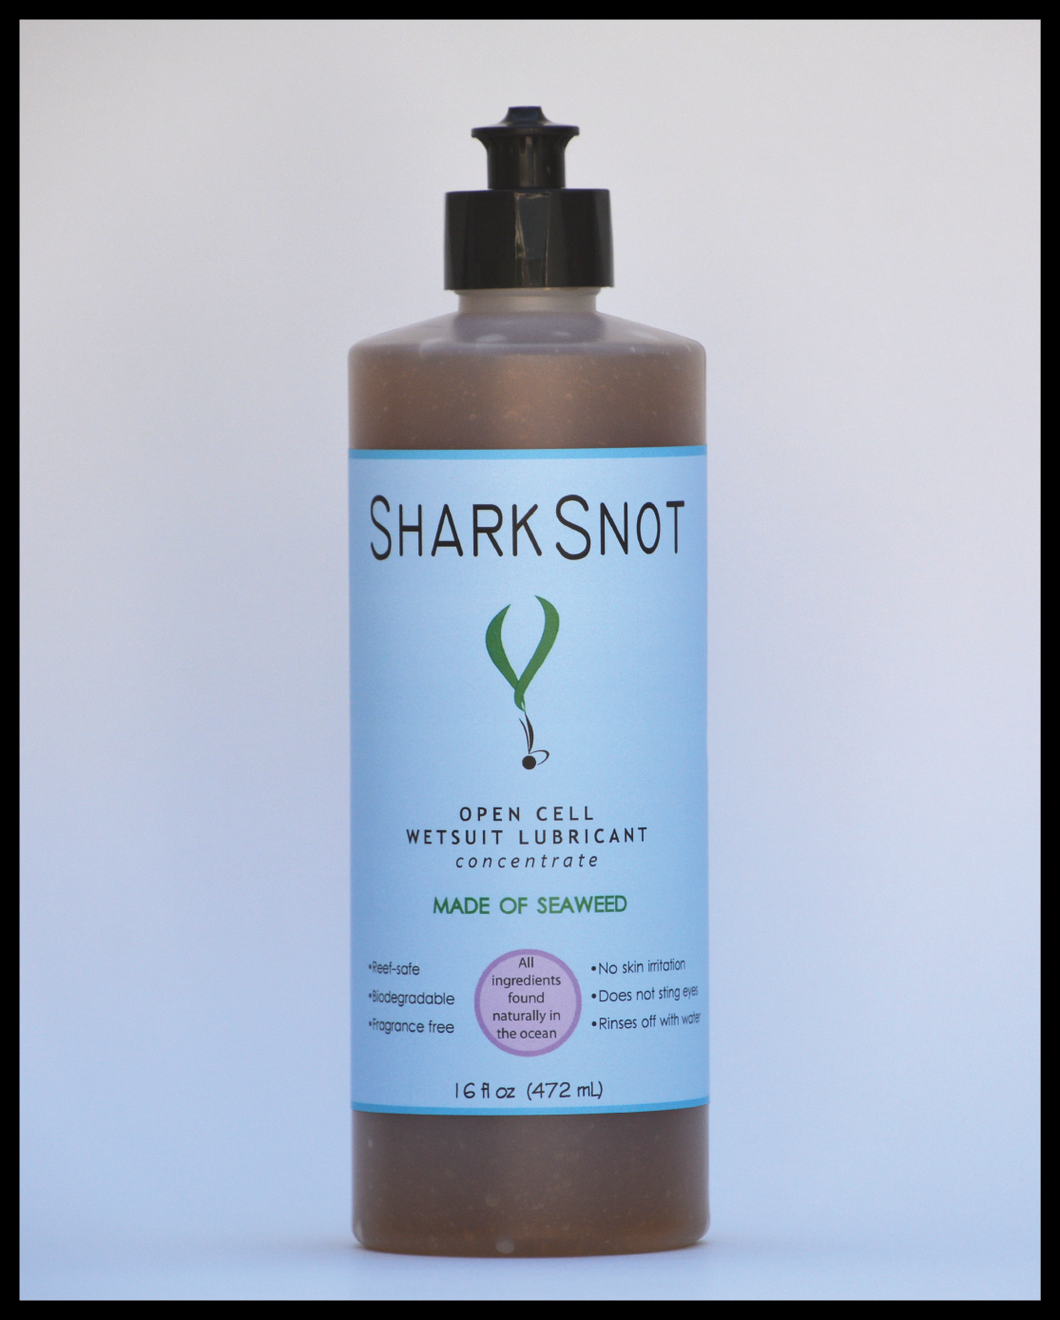 Shark Snot open cell wetsuit lube lubricant freedive spearfish freediving spearfishing biodegradable eco-friendly seaweed based natural